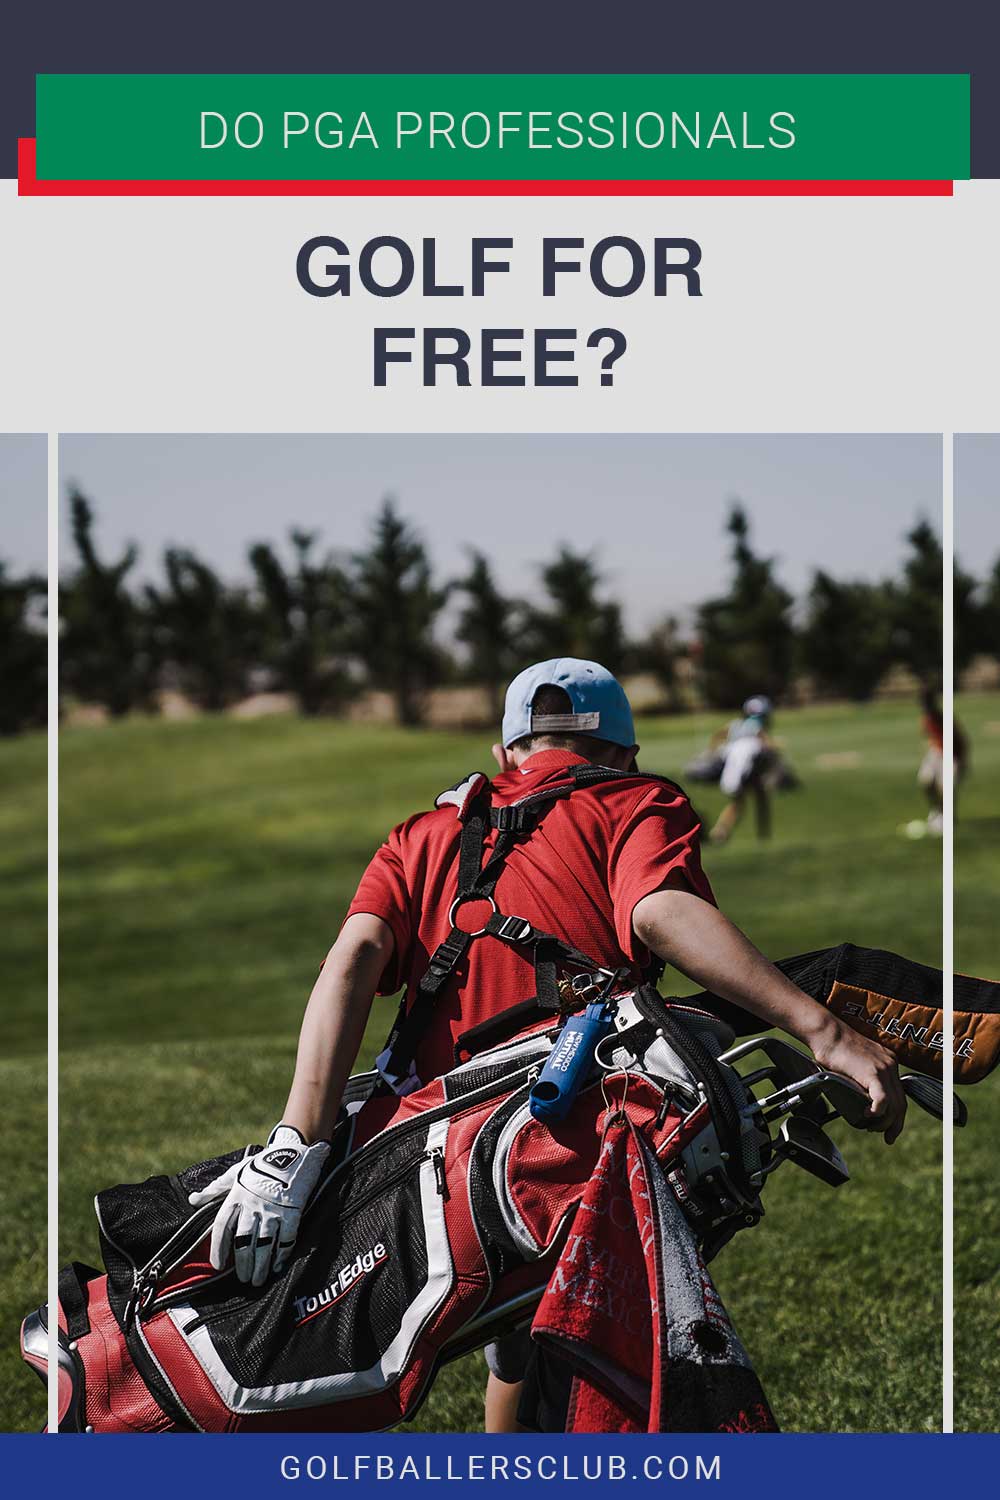 Man in red t-shirt carrying golf accessories - Do PGA Professionals Golf For Free?